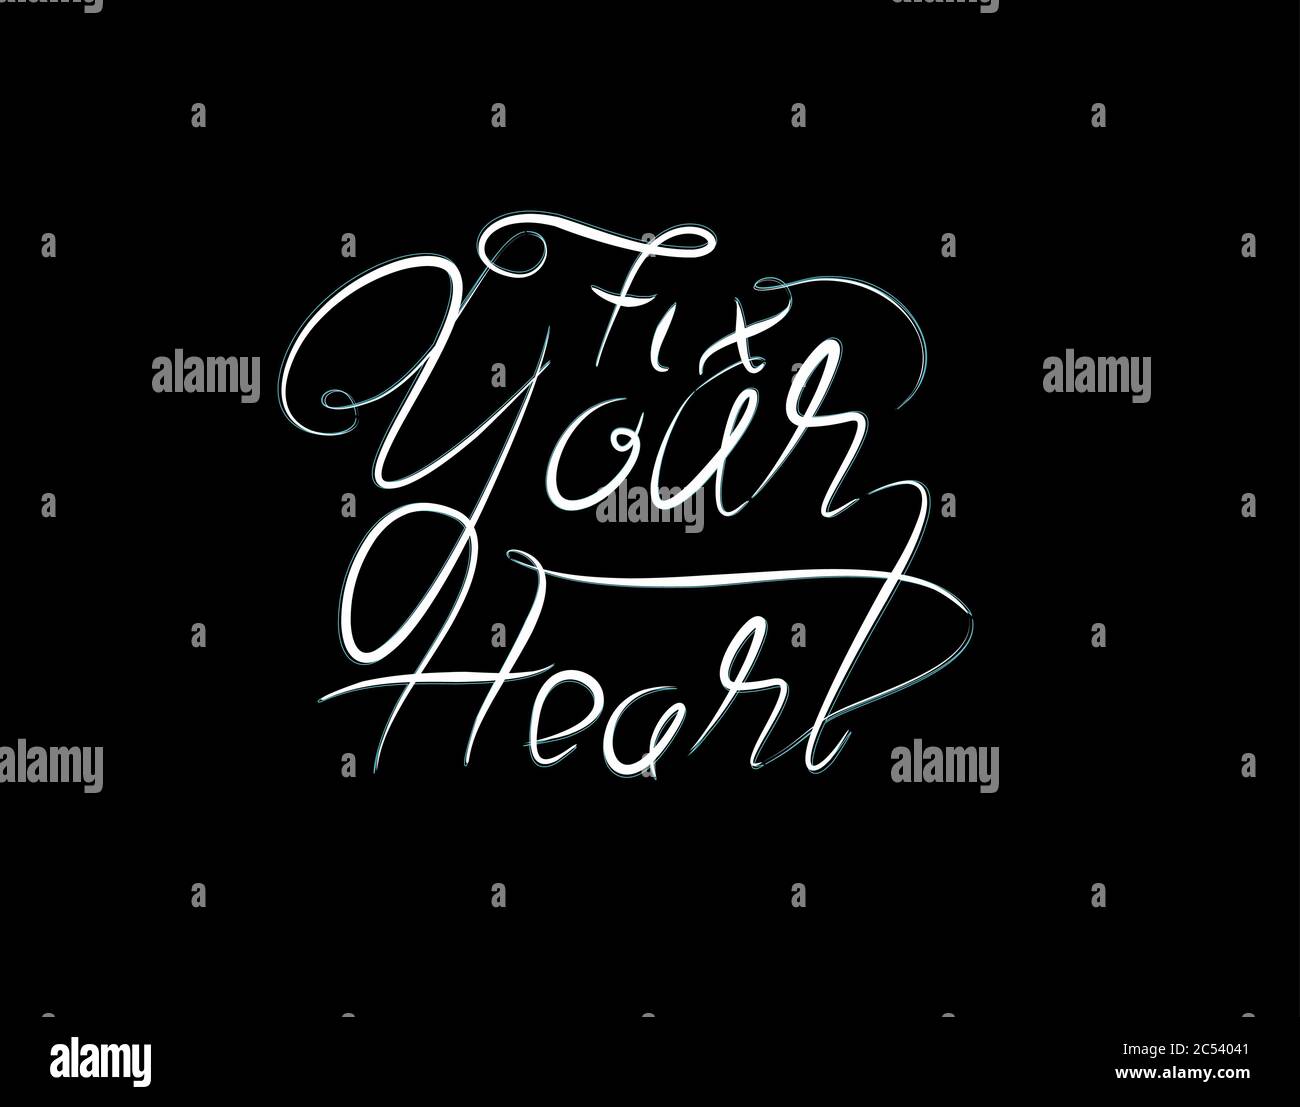 Fix Your Heart Lettering Text on Black background in vector illustration Stock Vector